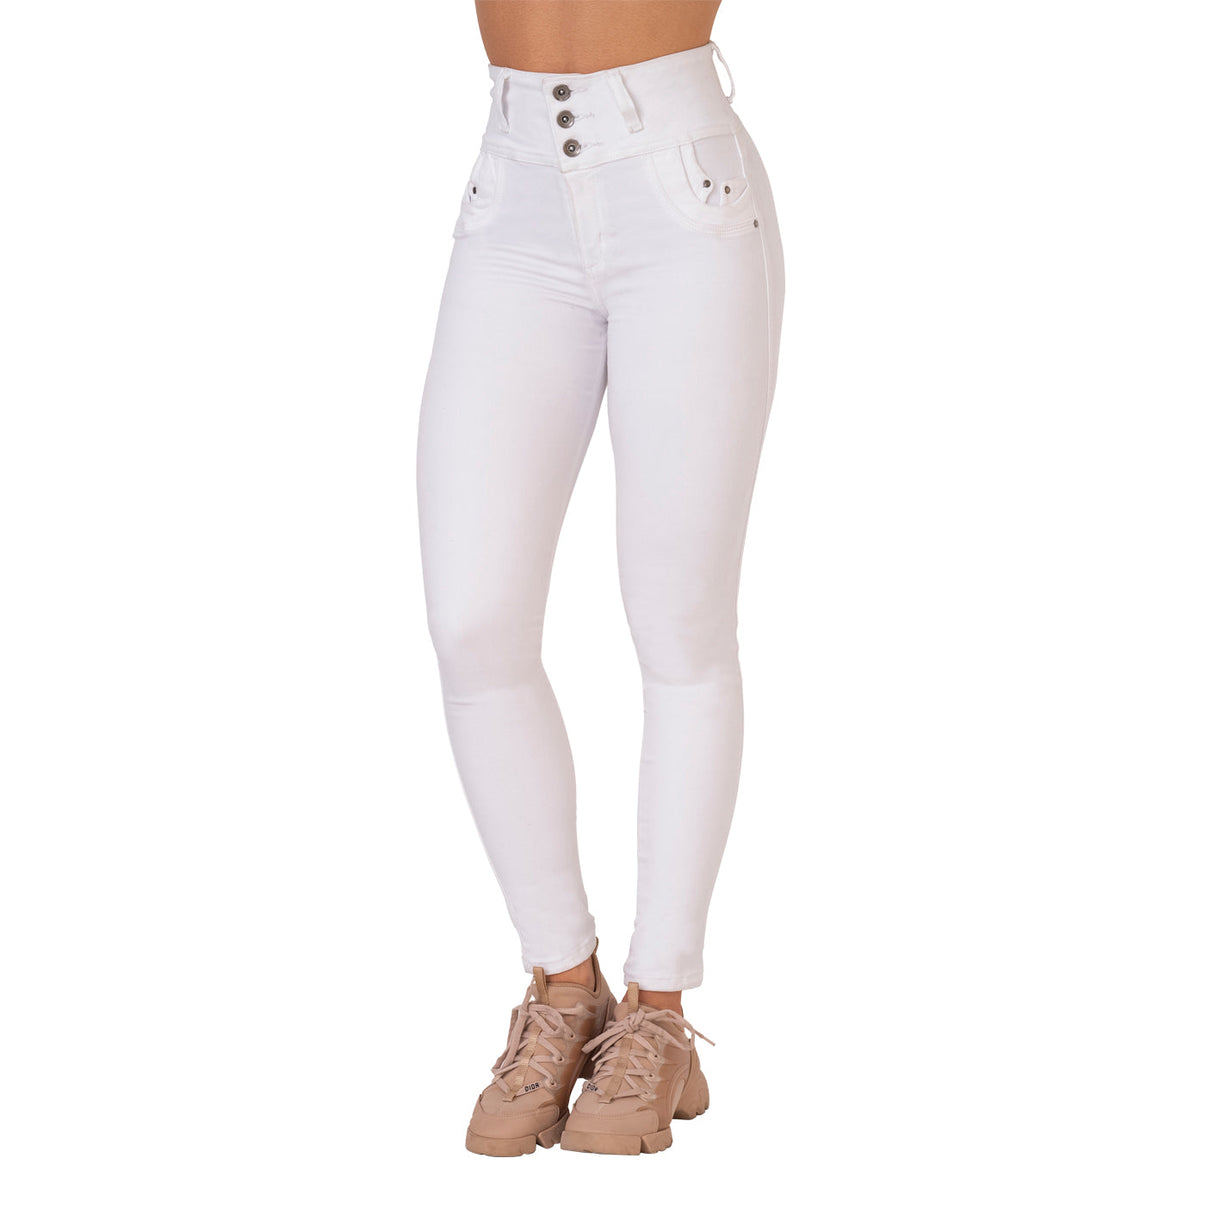 Comprar LT.ROSE Butt Lifting Jeans, Pantalones Colombianos Levanta Cola, High Waisted Jeans for Women, Colombian Jeans en USA desde Costa Rica